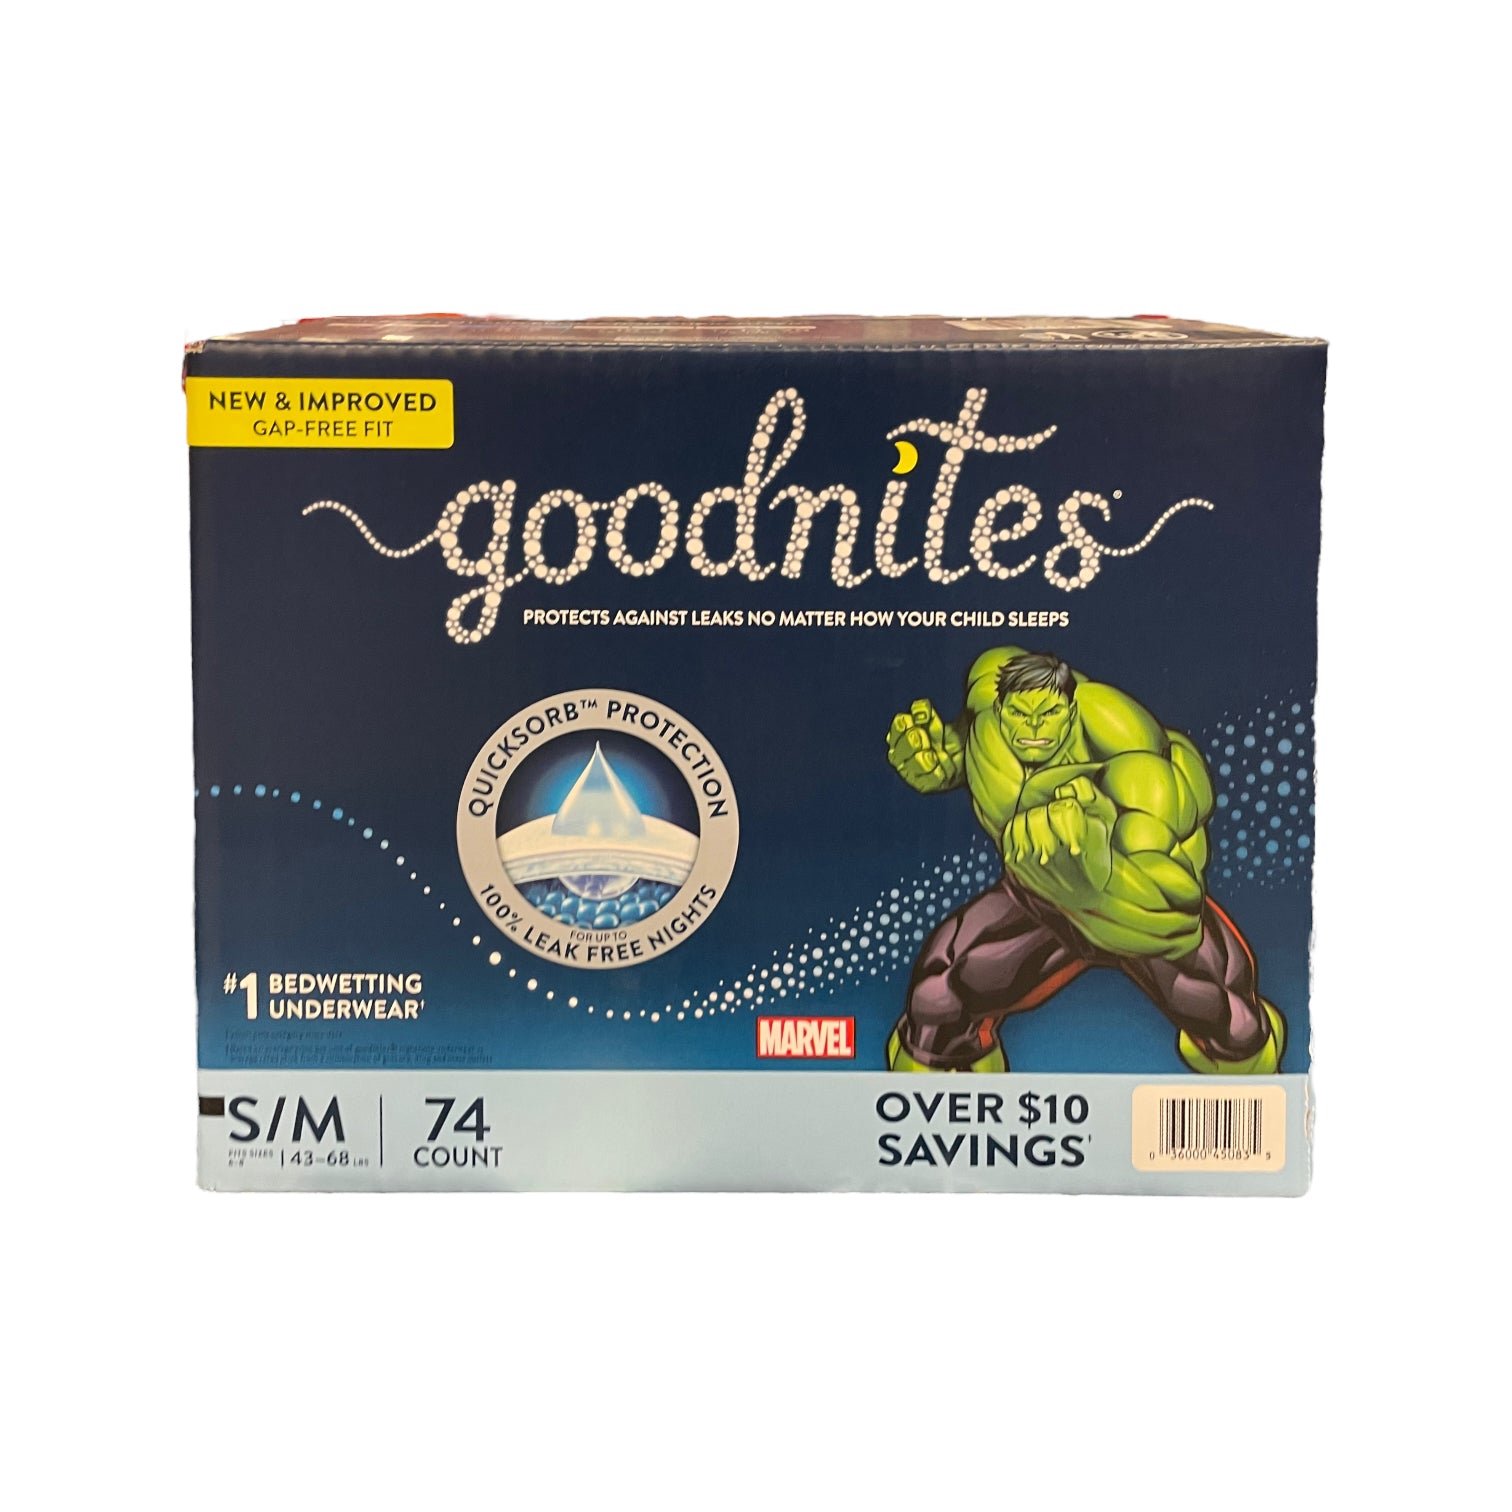 Goodnites Bedwetting Underwear for Boys S/M, 74 Count